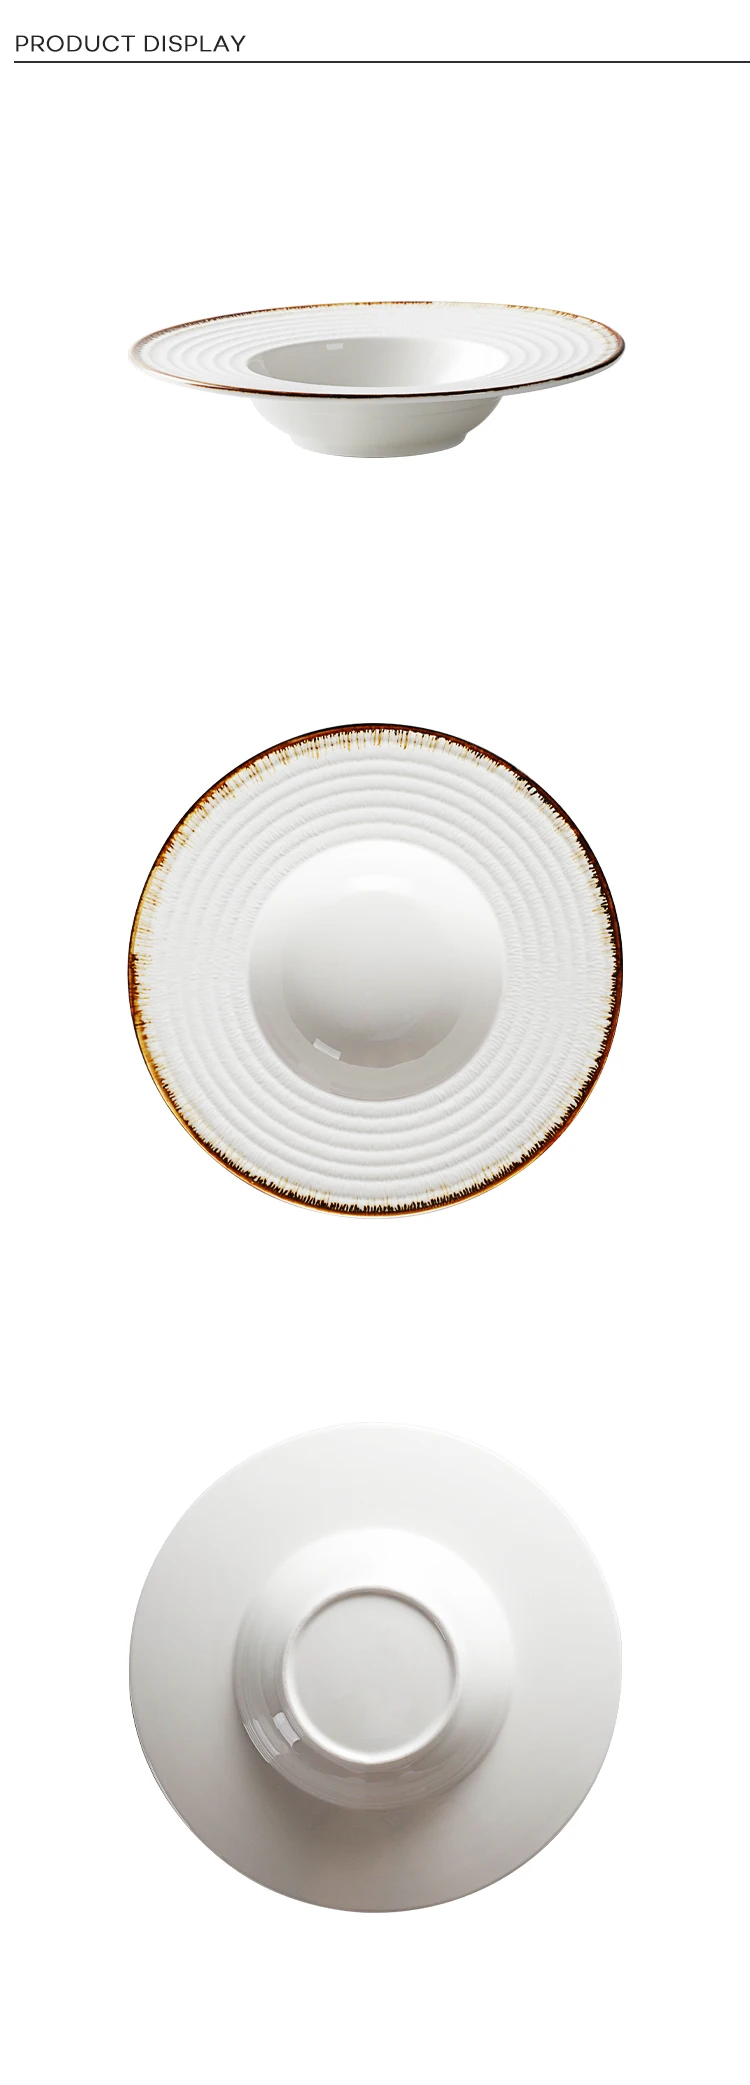 High Quality 28ceramics Used Restaurant Dishes For Sale, Coupe Soup Bowl, Rustic Rim Catering Ceramic Pasta Plate^